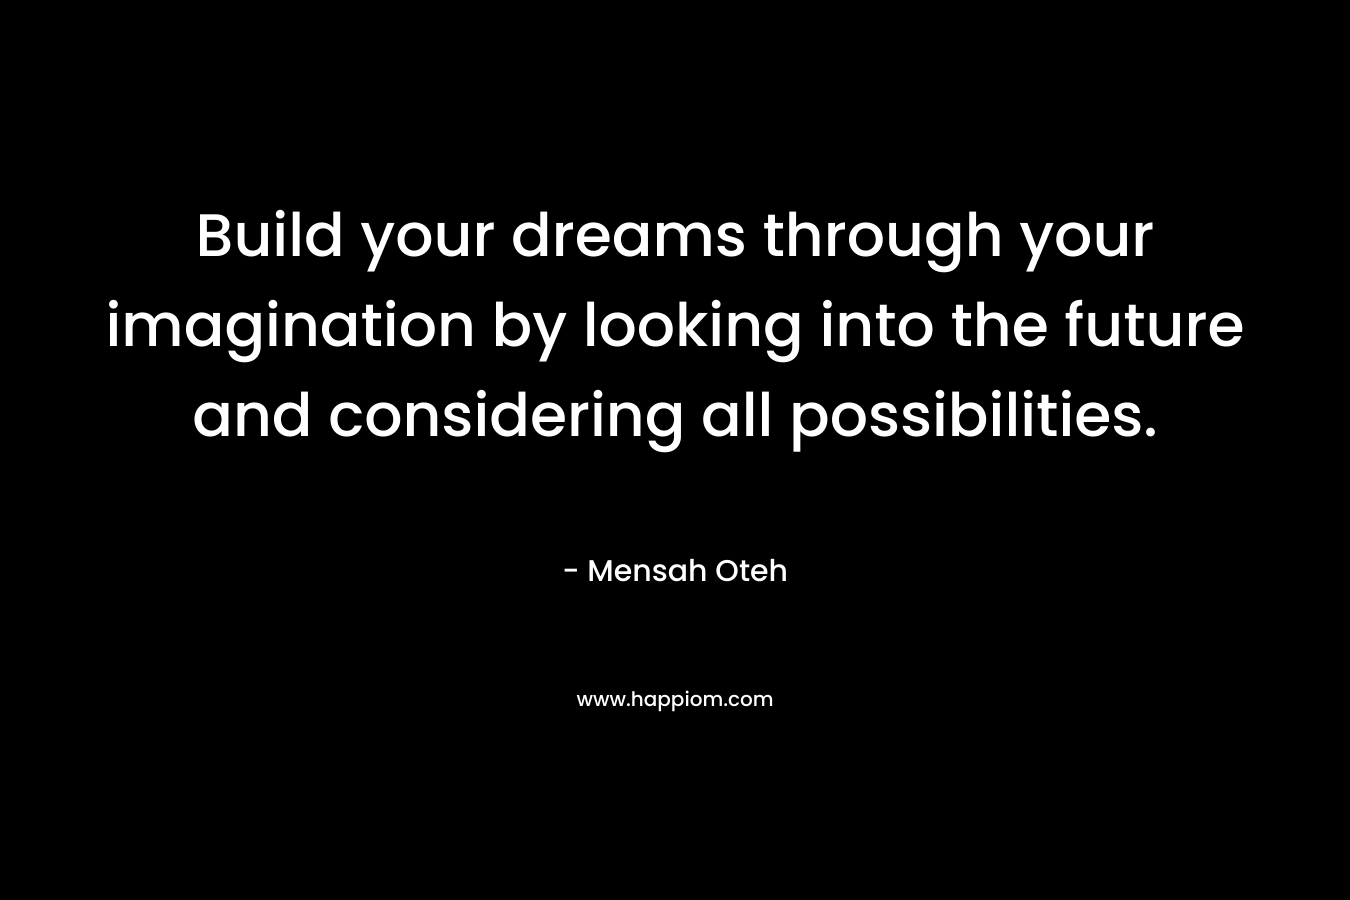 Build your dreams through your imagination by looking into the future and considering all possibilities.